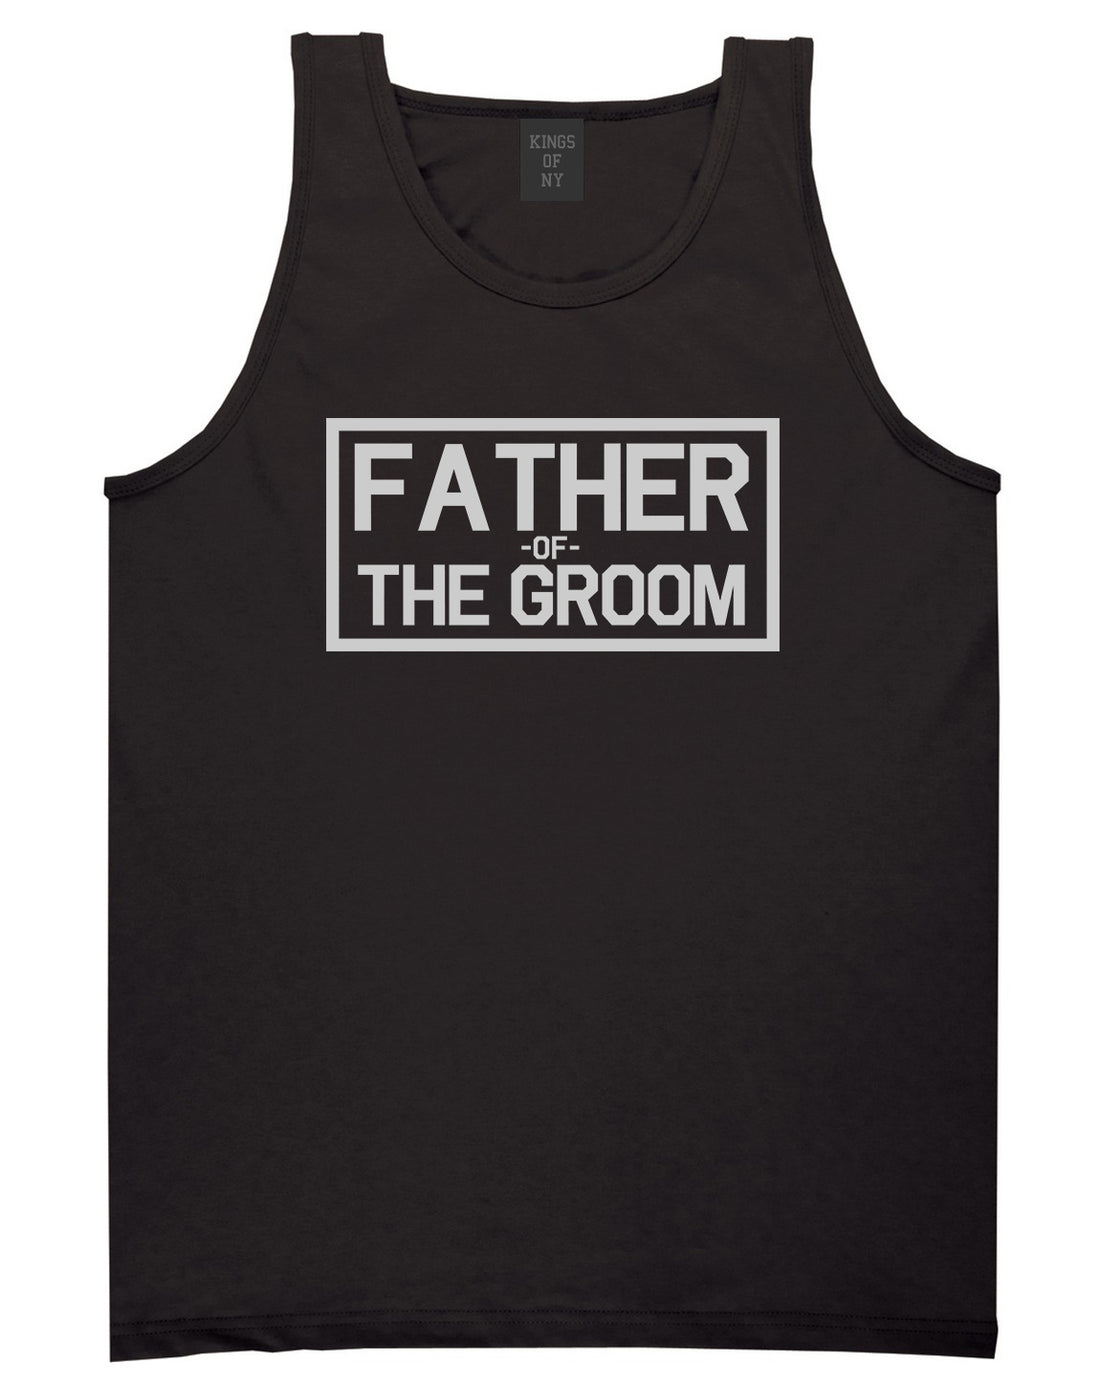 Father_Of_The_Groom Mens Black Tank Top Shirt by Kings Of NY